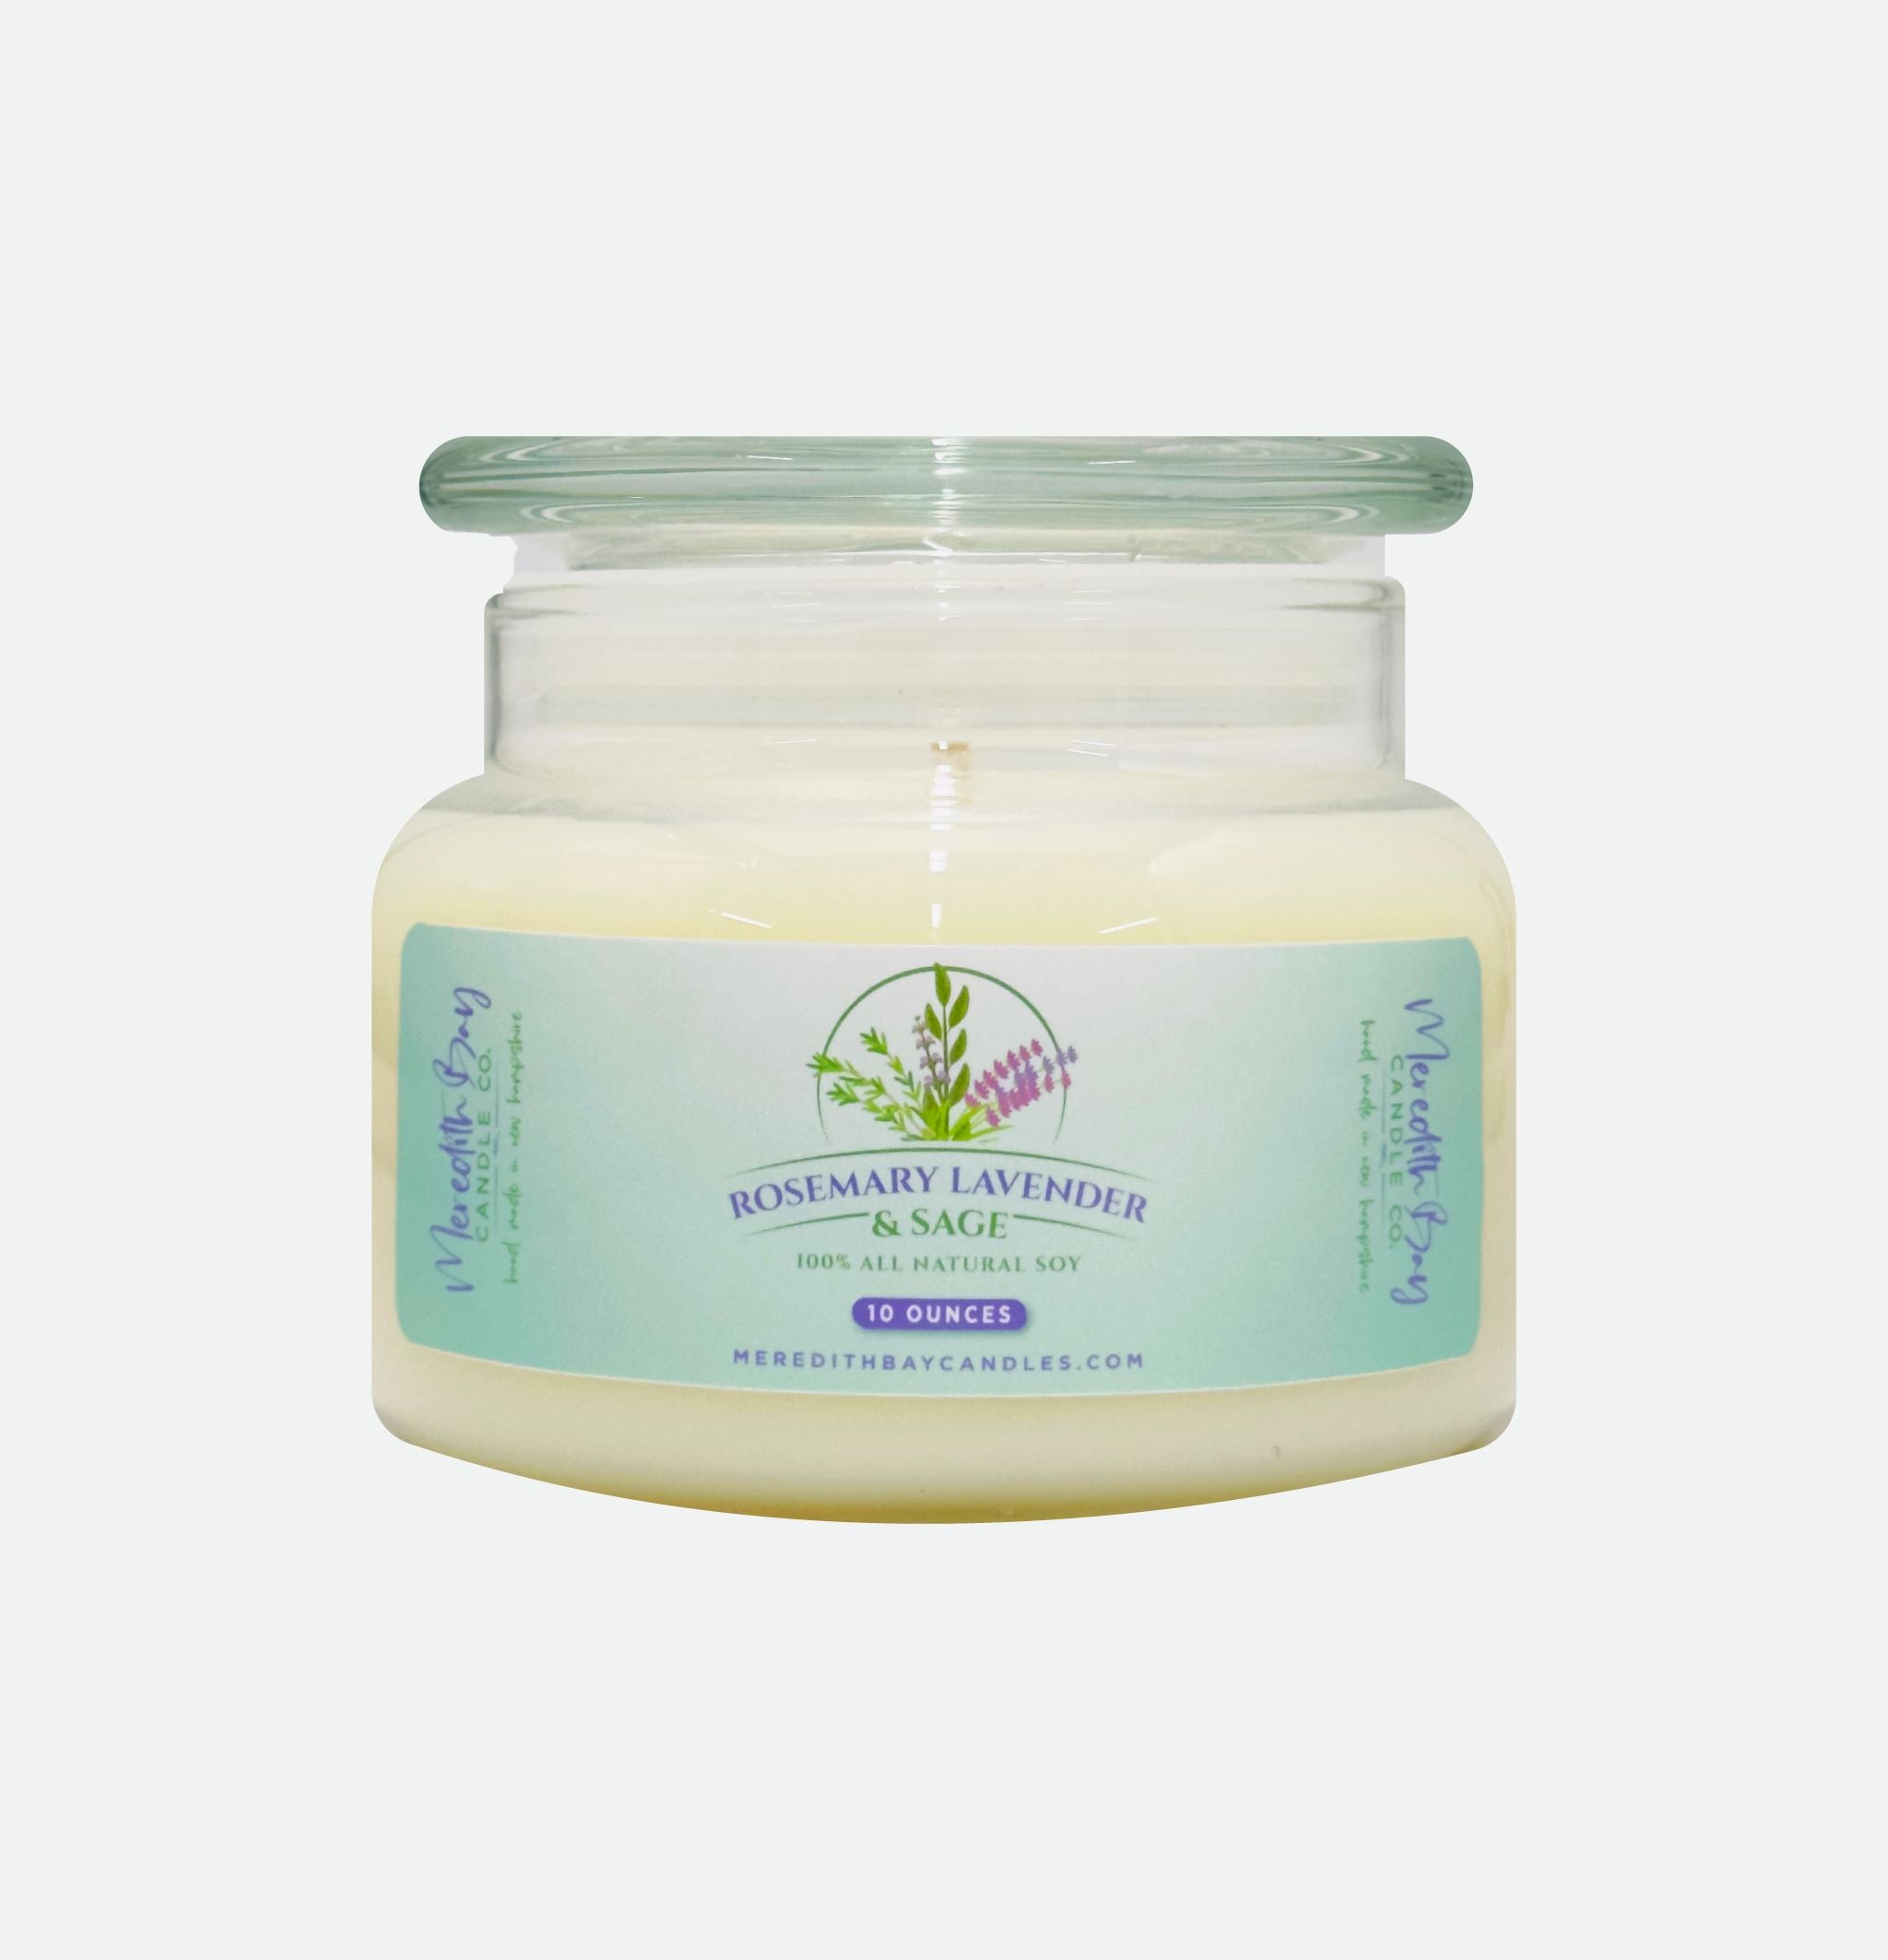 Rosemary, Lavender & Sage Soy Candle Meredith Bay Candle Co 10 Oz 